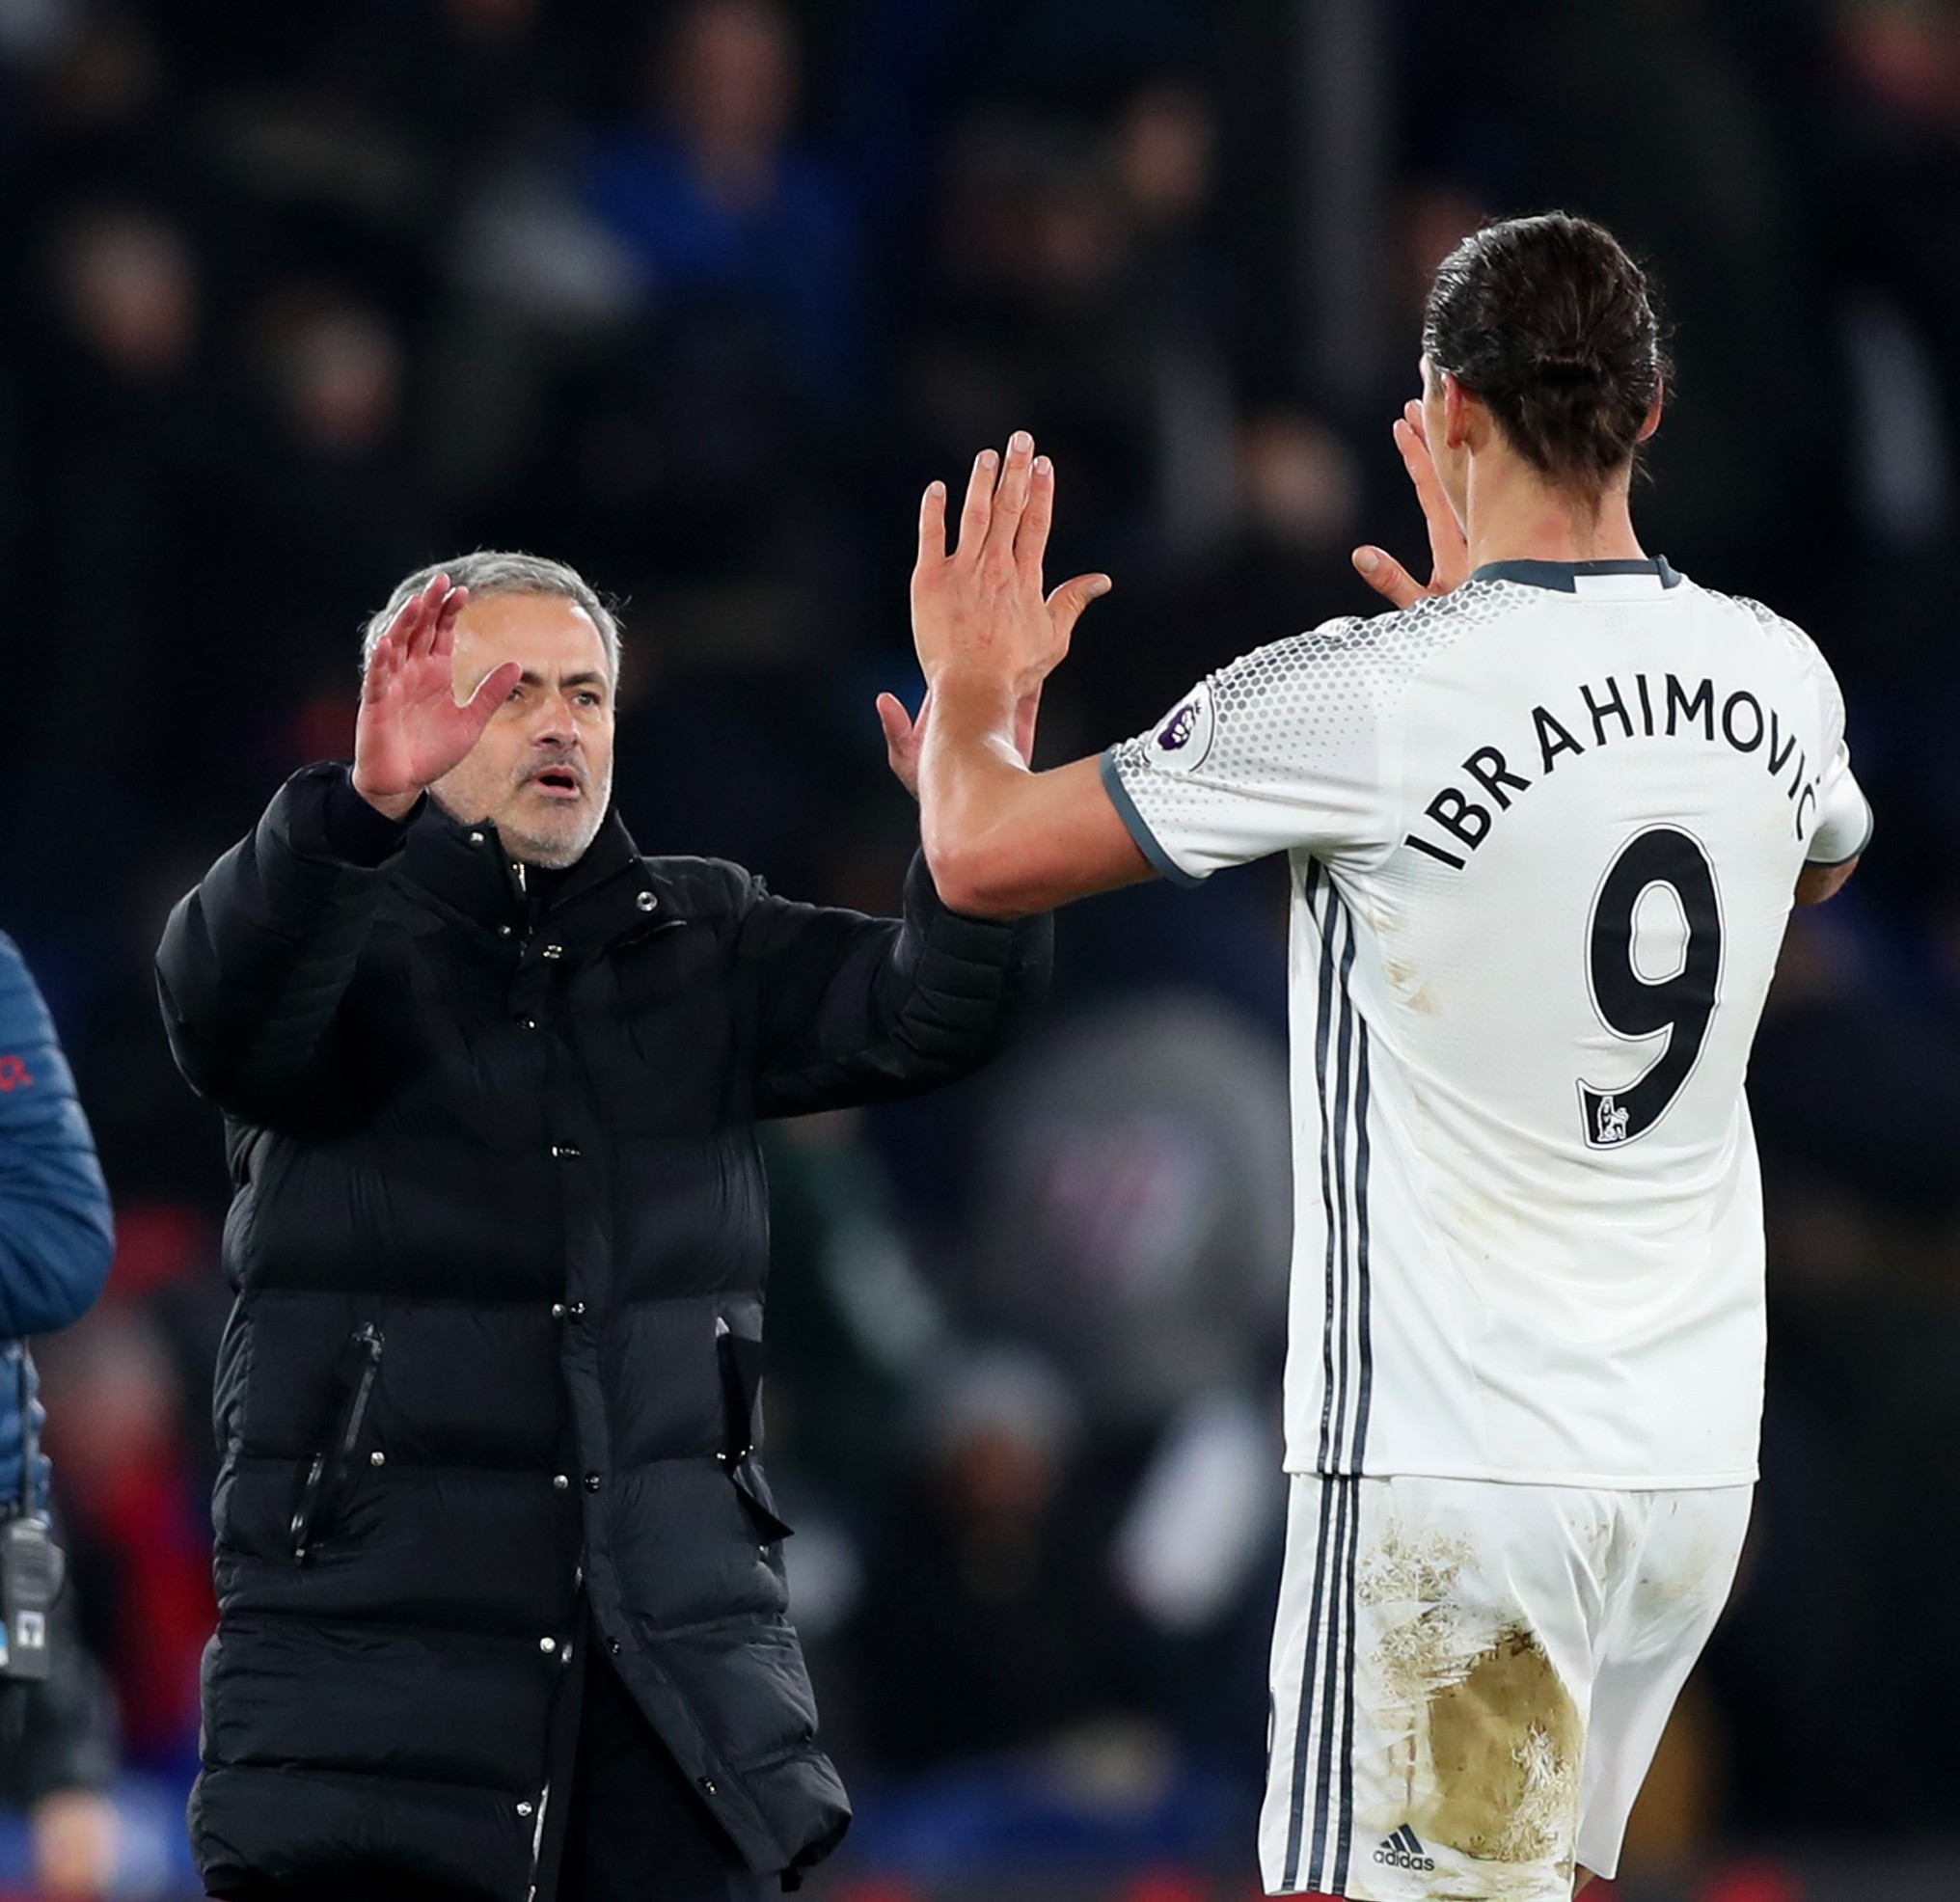 LONDON, ENGLAND - DECEMBER 14:  Jose Mourinho, Manager of Manchester United congratulates Zlatan Ibrahimovic after the Premier League match between Crystal Palace and Manchester United at Selhurst Park on December 14, 2016 in London, England.  (Photo by Christopher Lee/Getty Images)